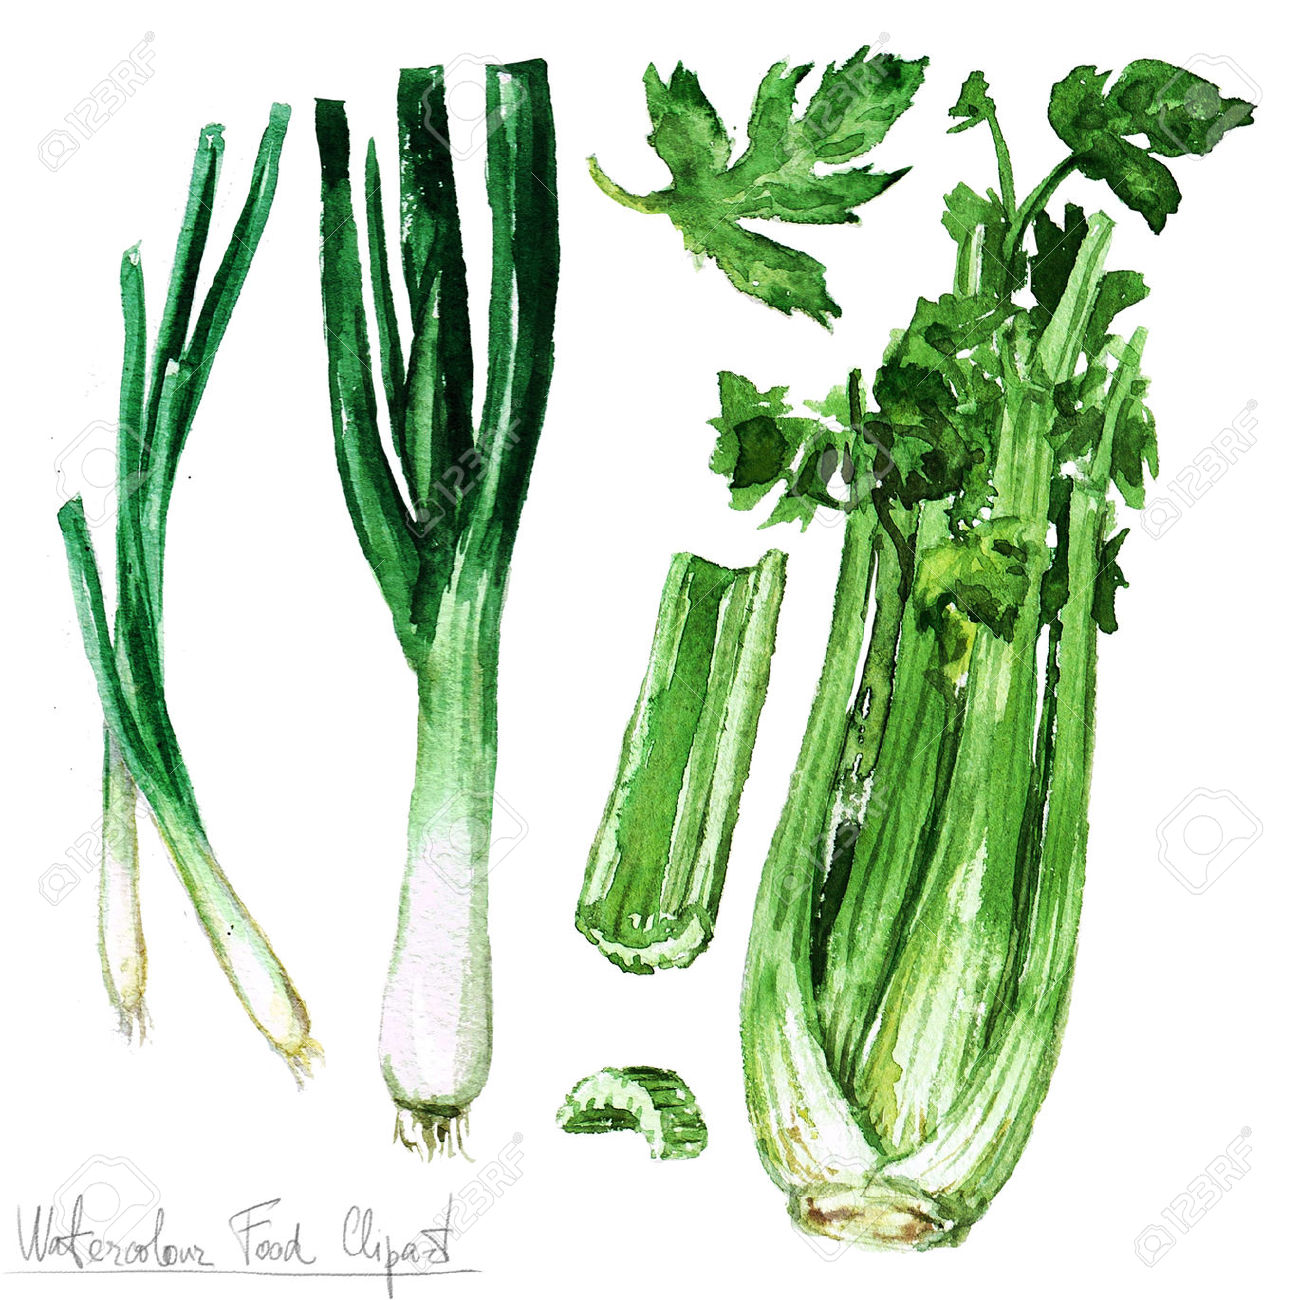 spring onion clipart - photo #39